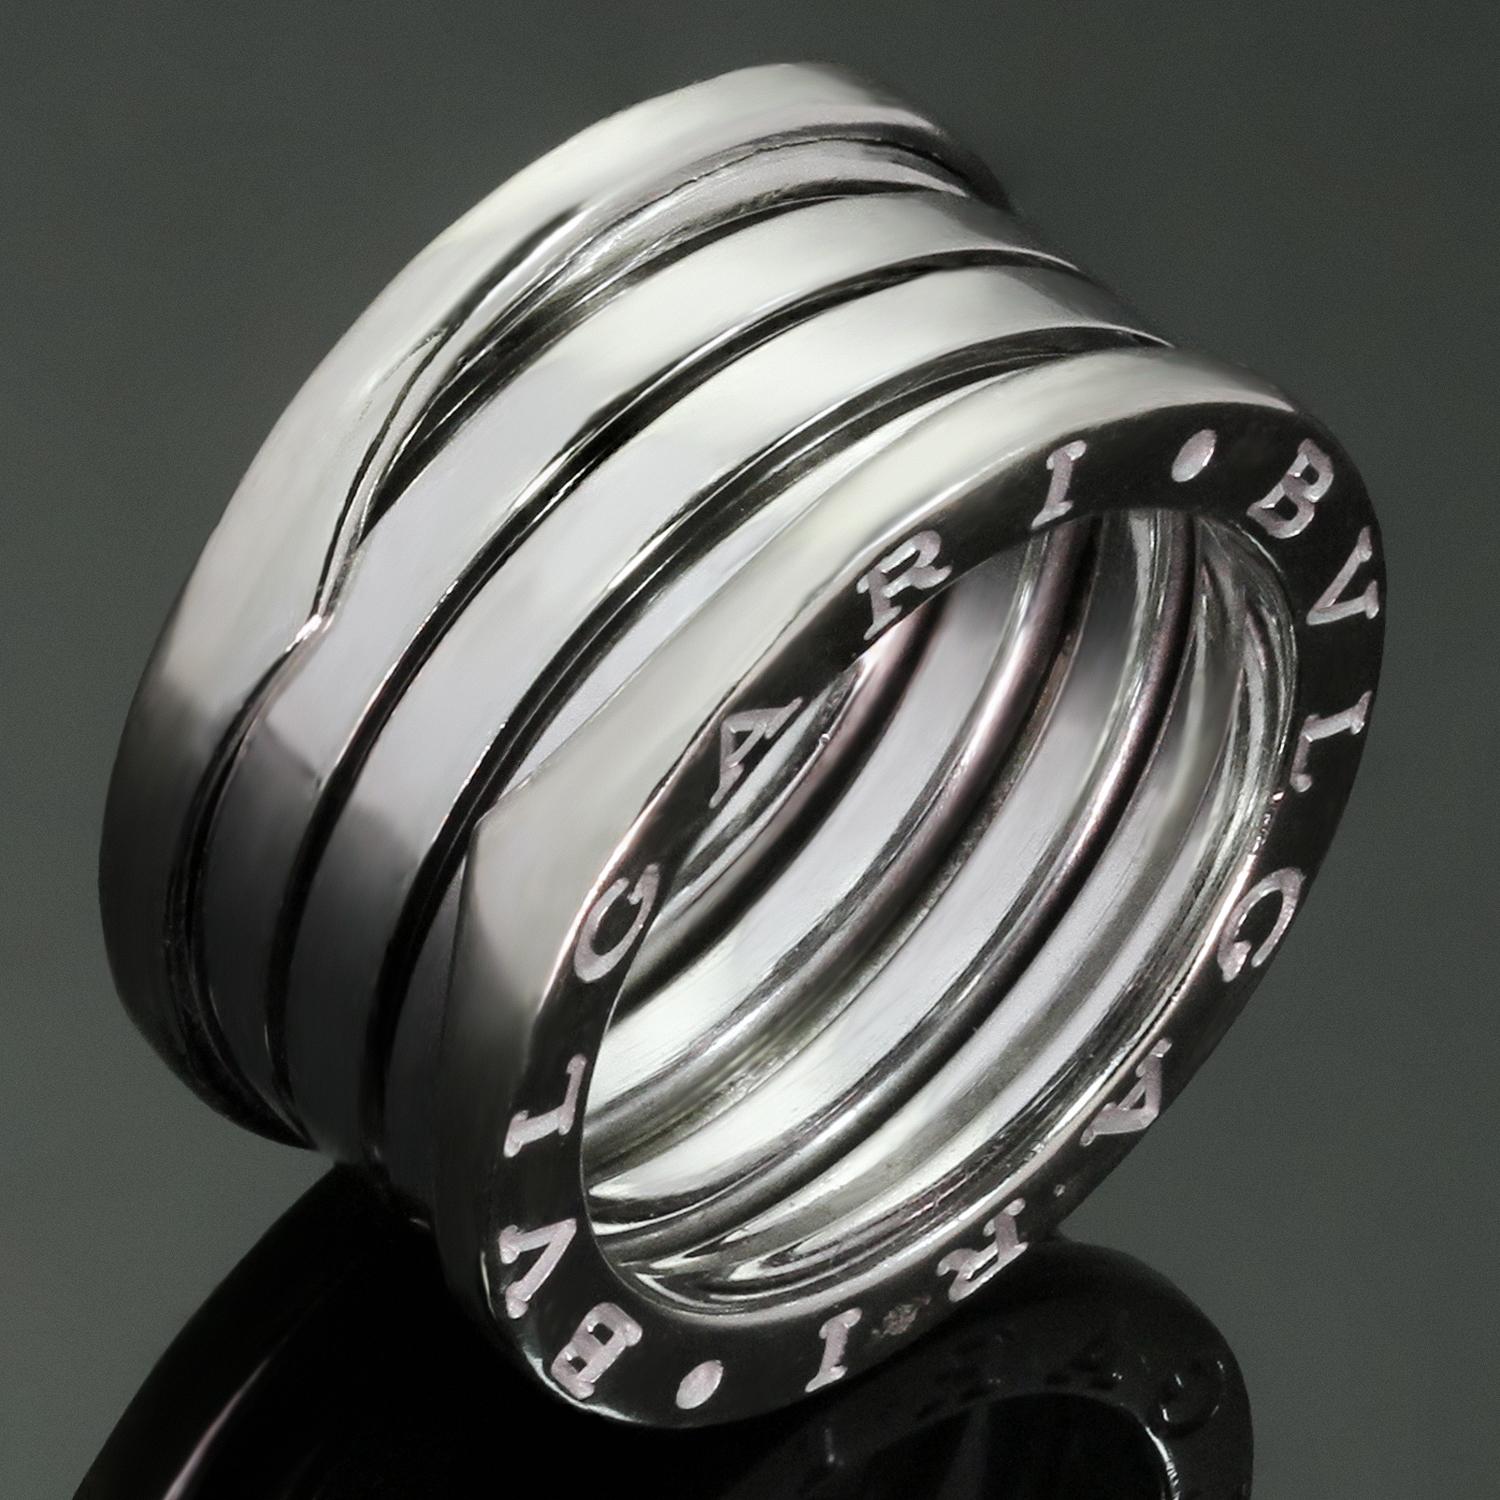 This unisex ring from Bulgari's iconic B.zero1 collection is crafted in 18k white gold and features a three-band design engraved with the Bvlgari logo on both sides. Made in Italy circa 2010s. Measurements: 0.43